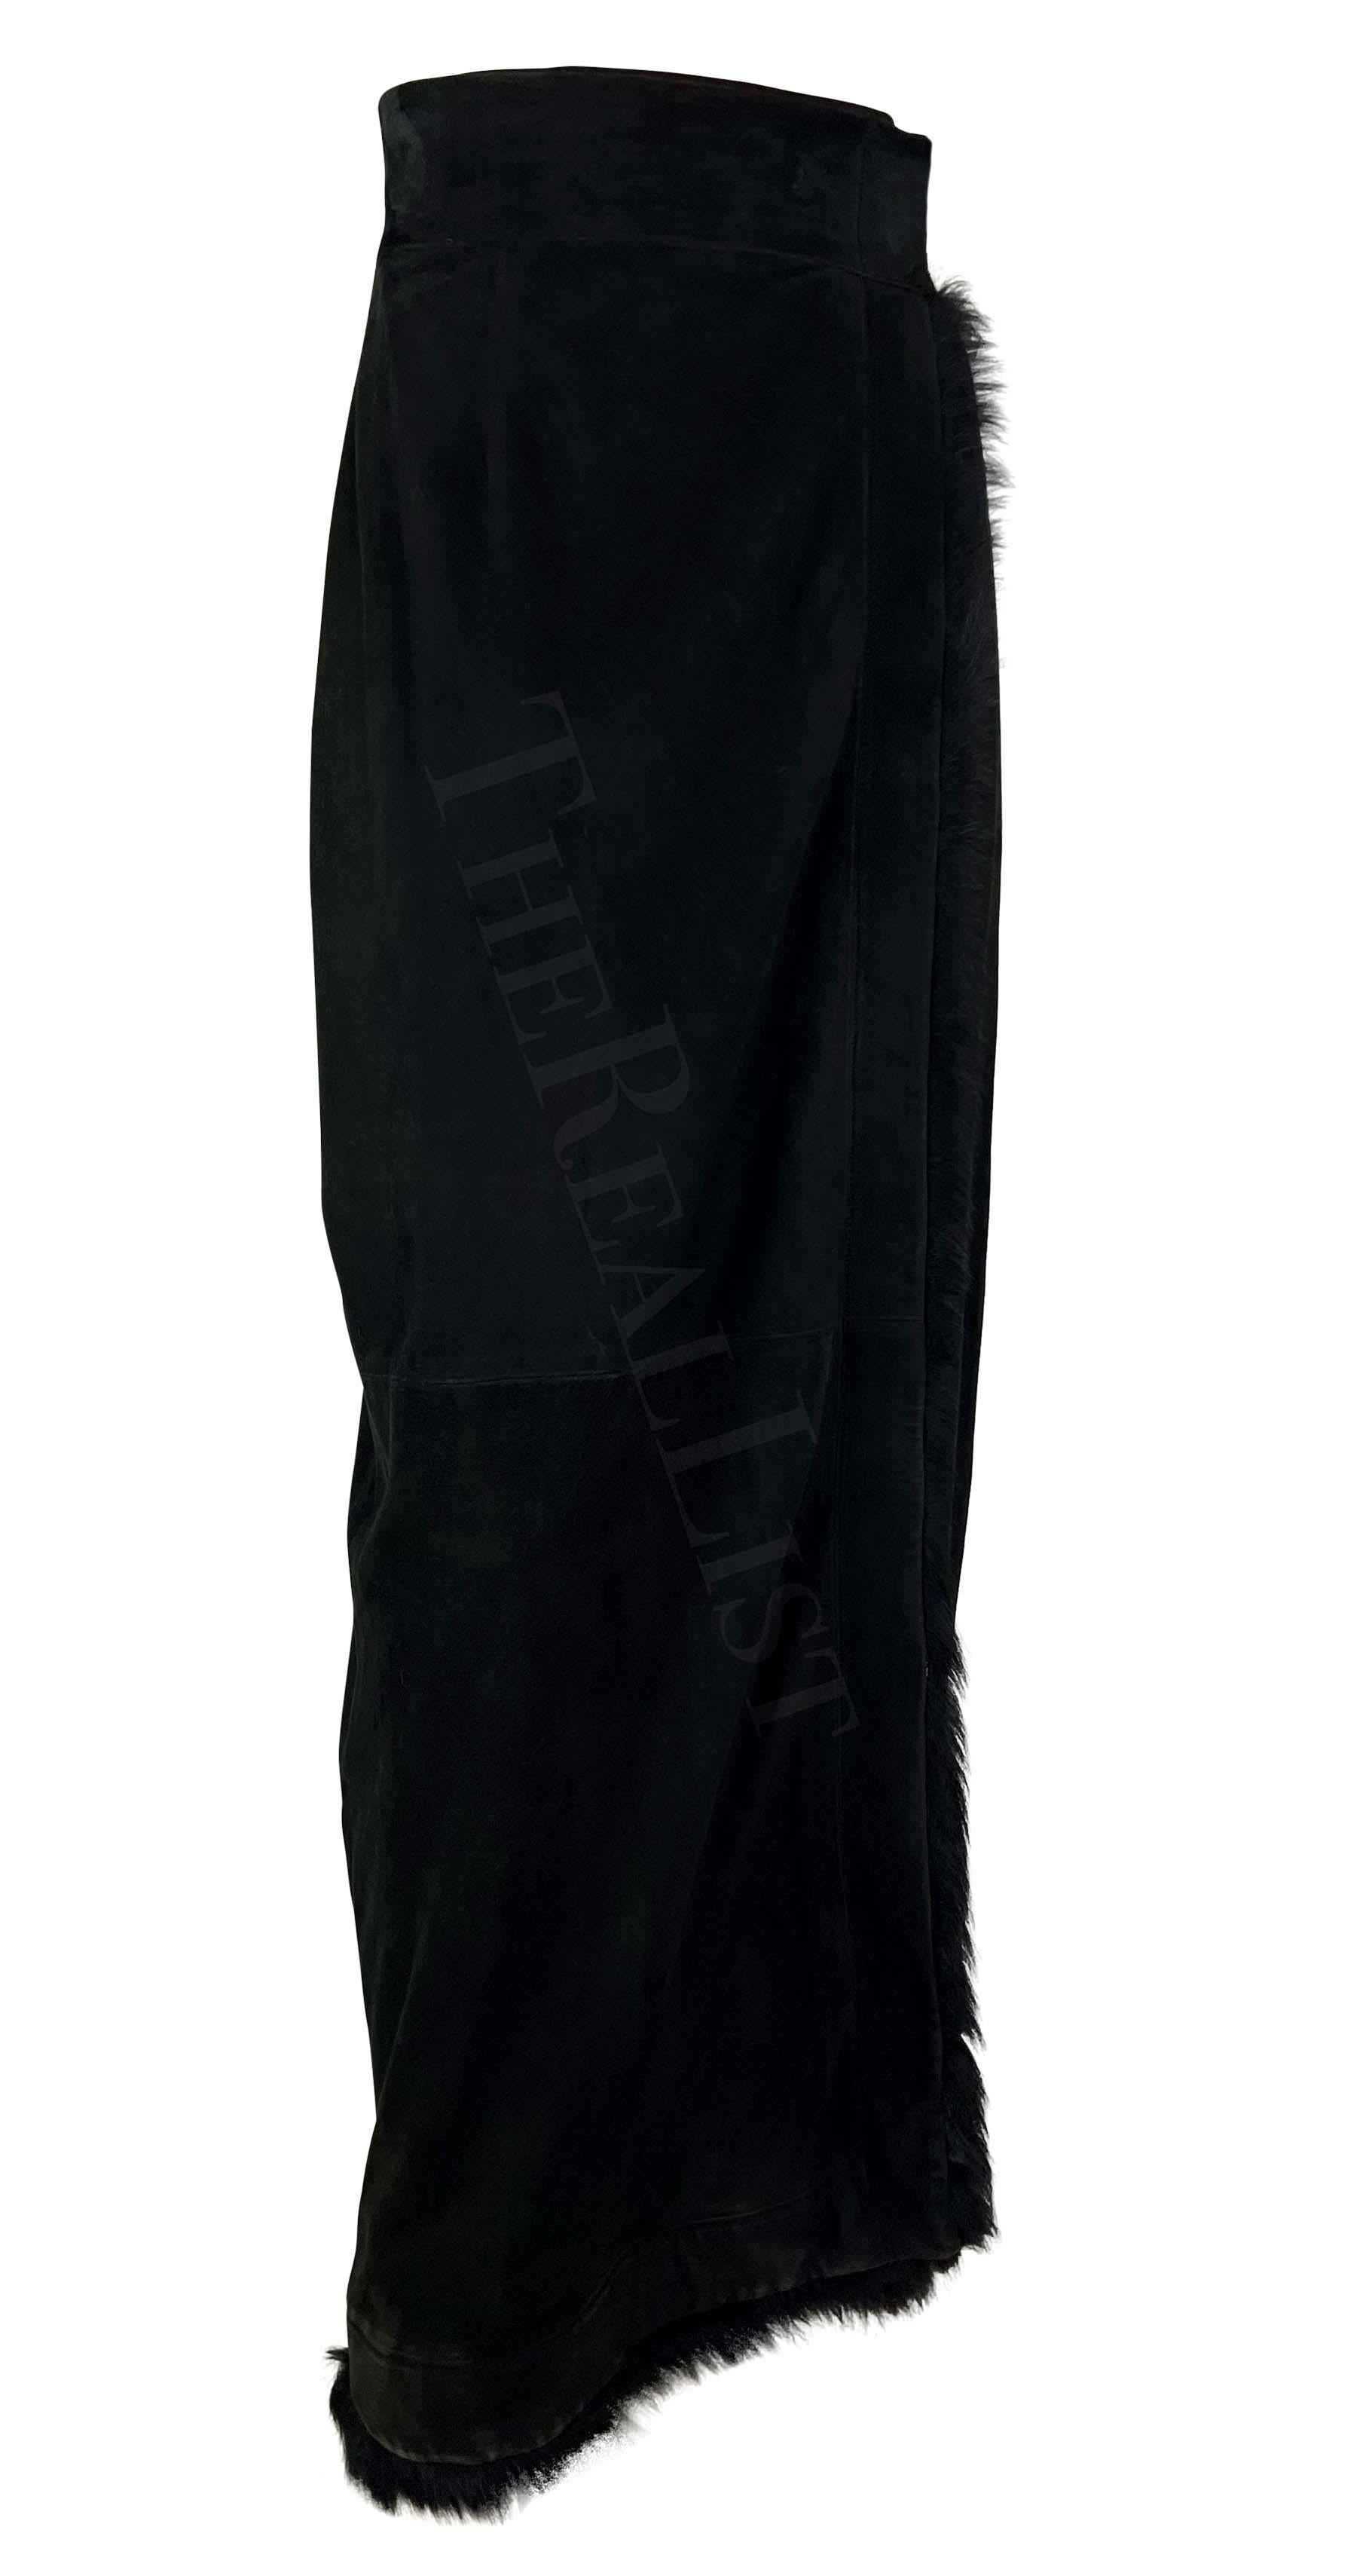 F/W 1996 Gucci by Tom Ford Runway Black Suede Fur Wrap Maxi Slit Skirt For Sale 7